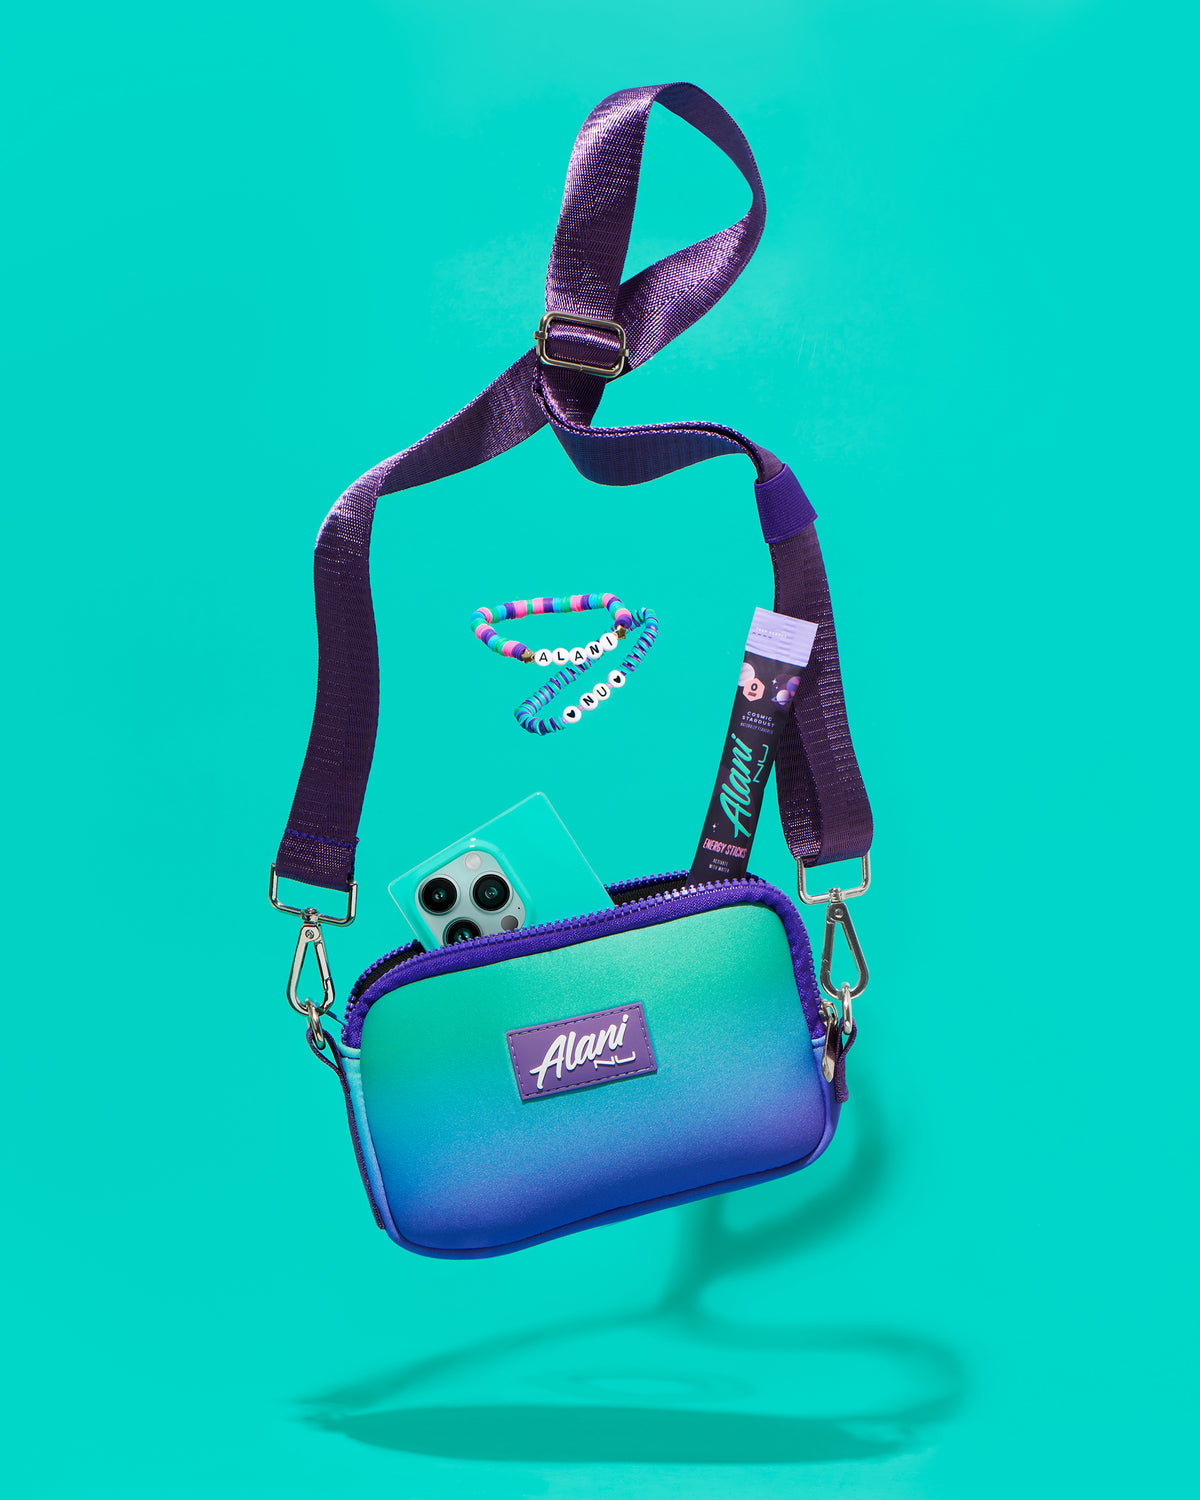 A shoulder bag in twilight sky color displayed with energy stick breezeberry flavor and an Iphone. 